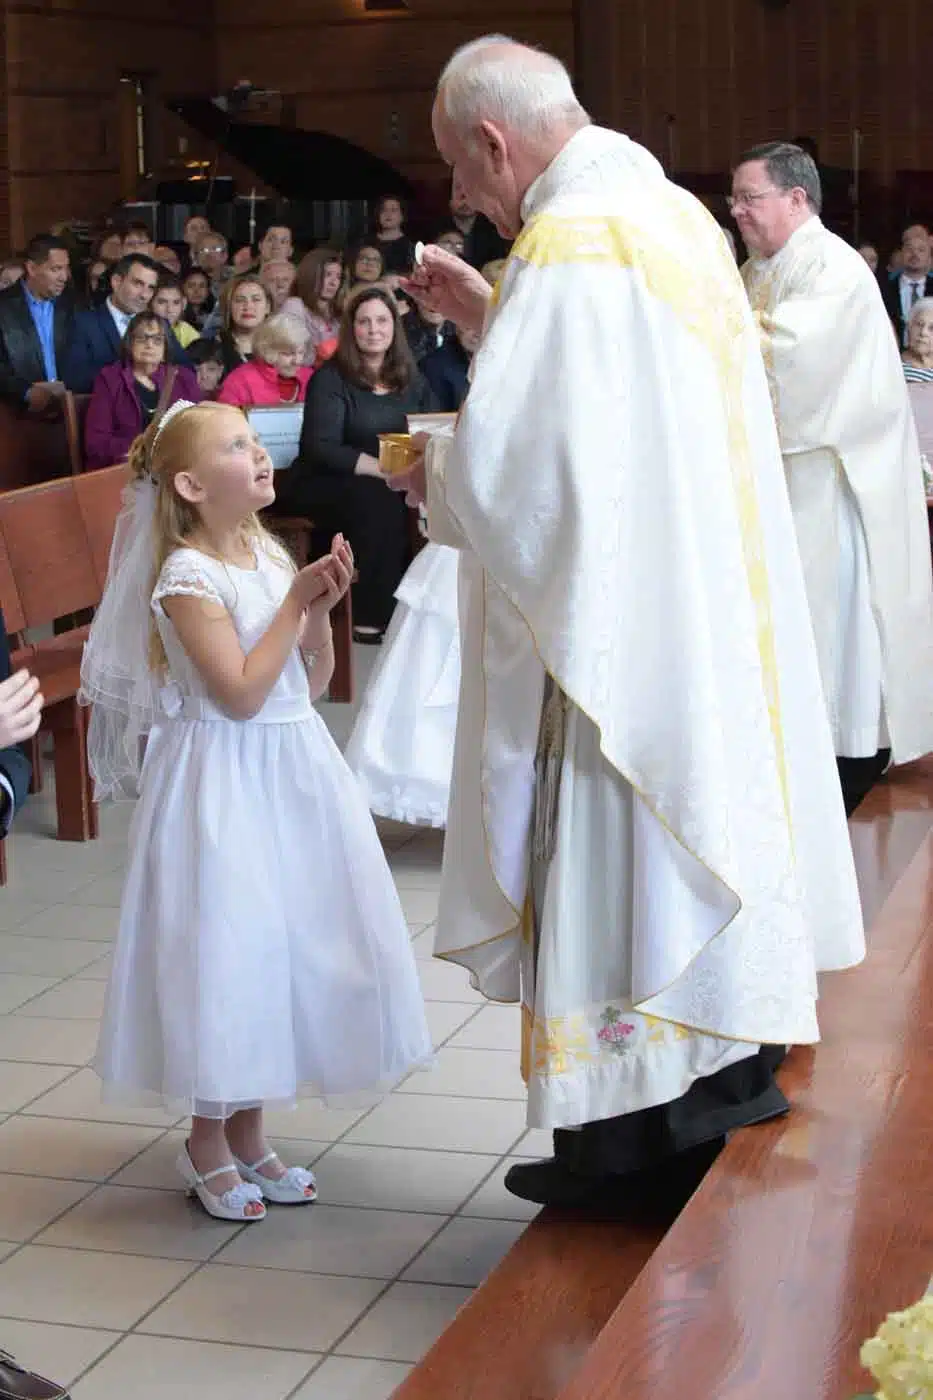 Young girl receiving first communion from priest